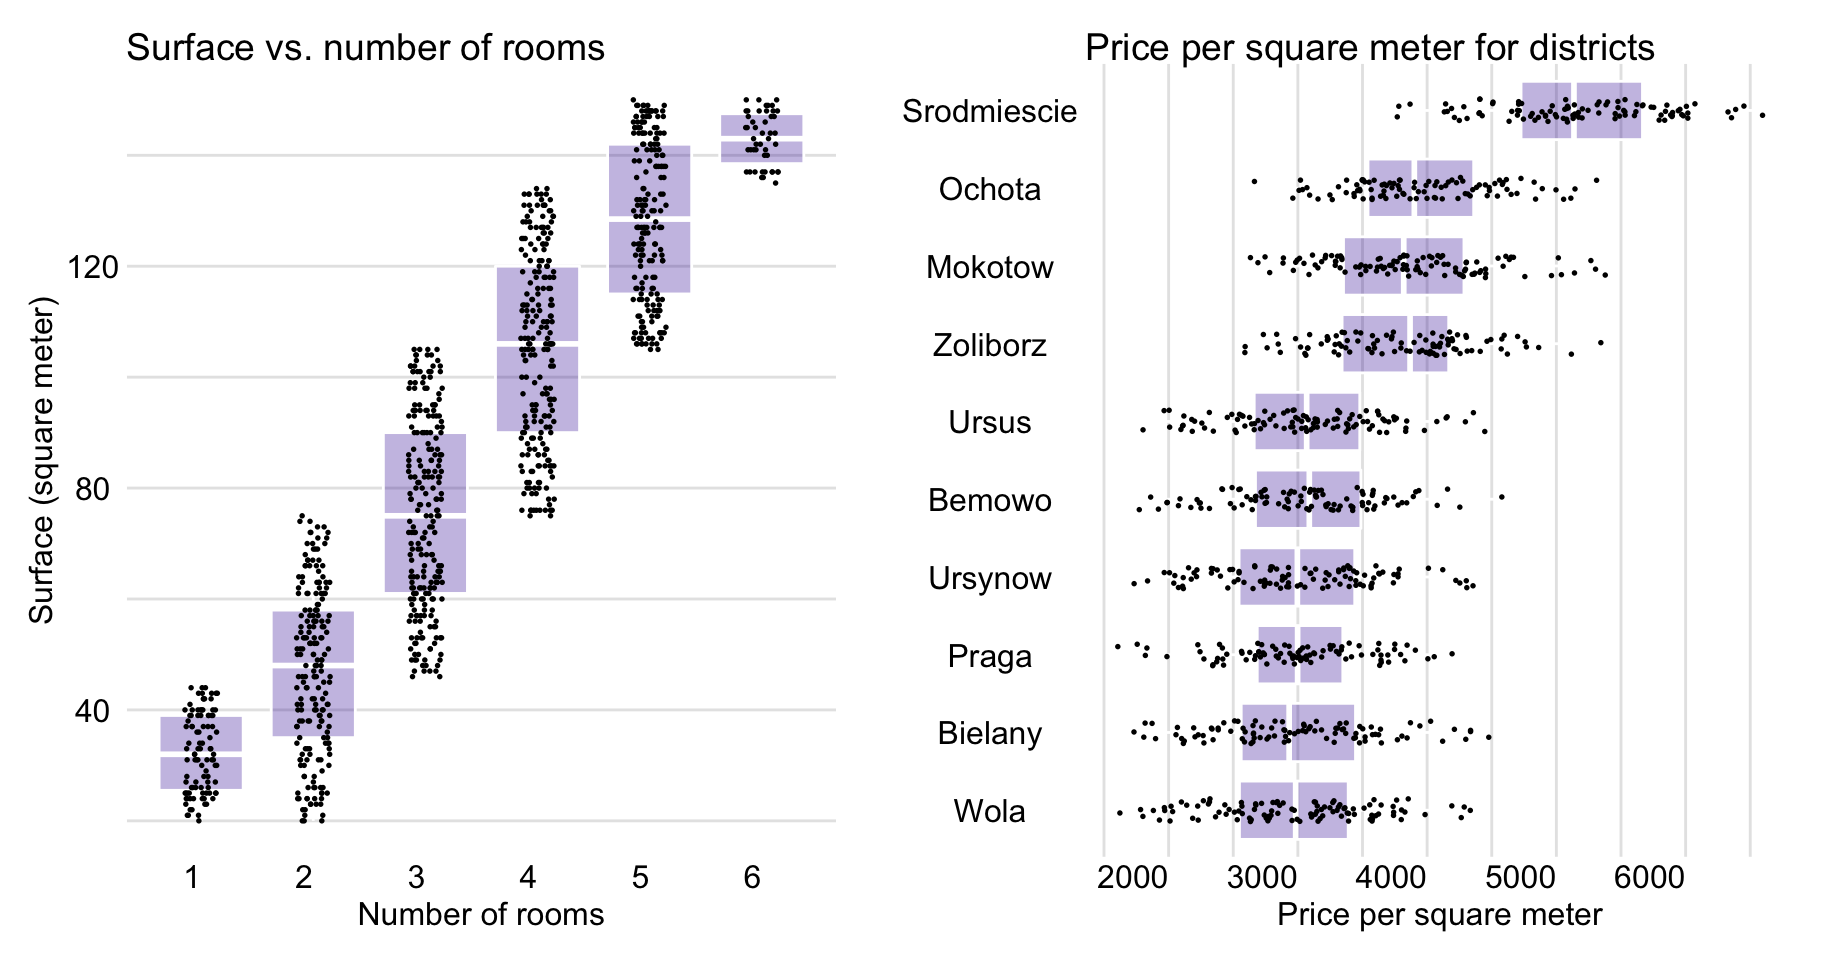 Apartment-prices data. Surface vs. number of rooms (left-hand-side panel) and price per square meter for different districts (right-hand-side panel).